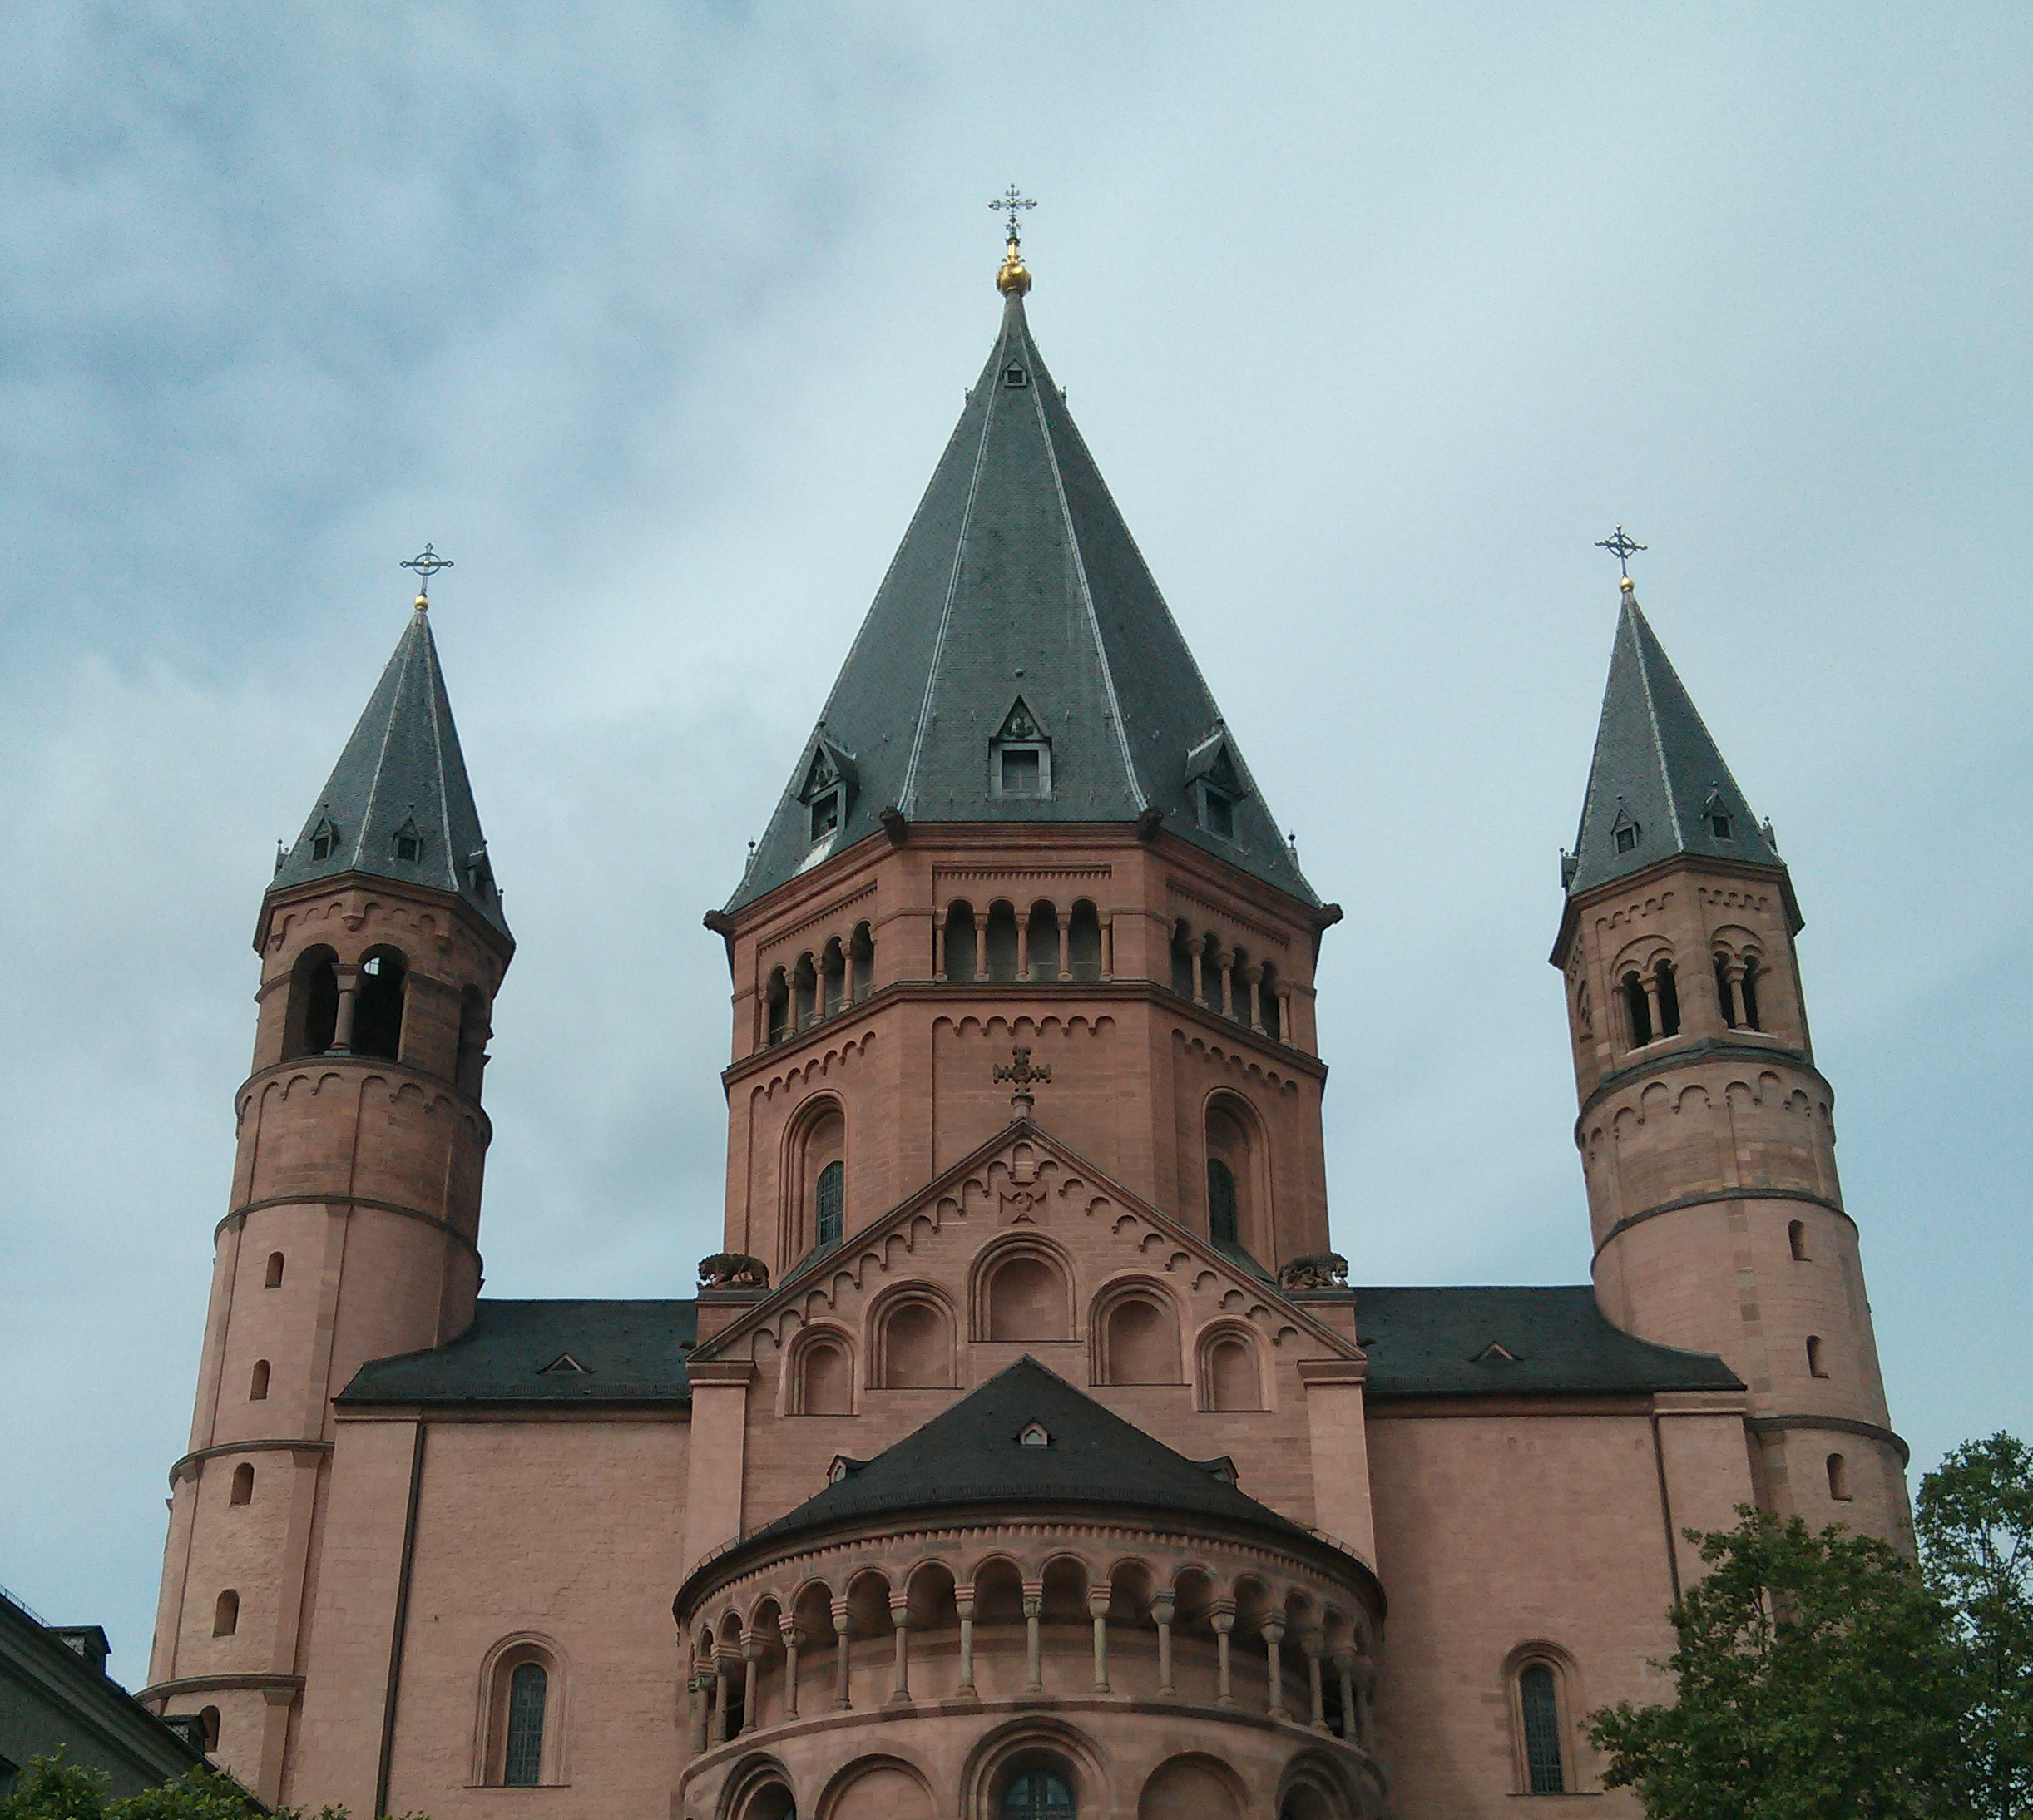 Cathedral of Mainz